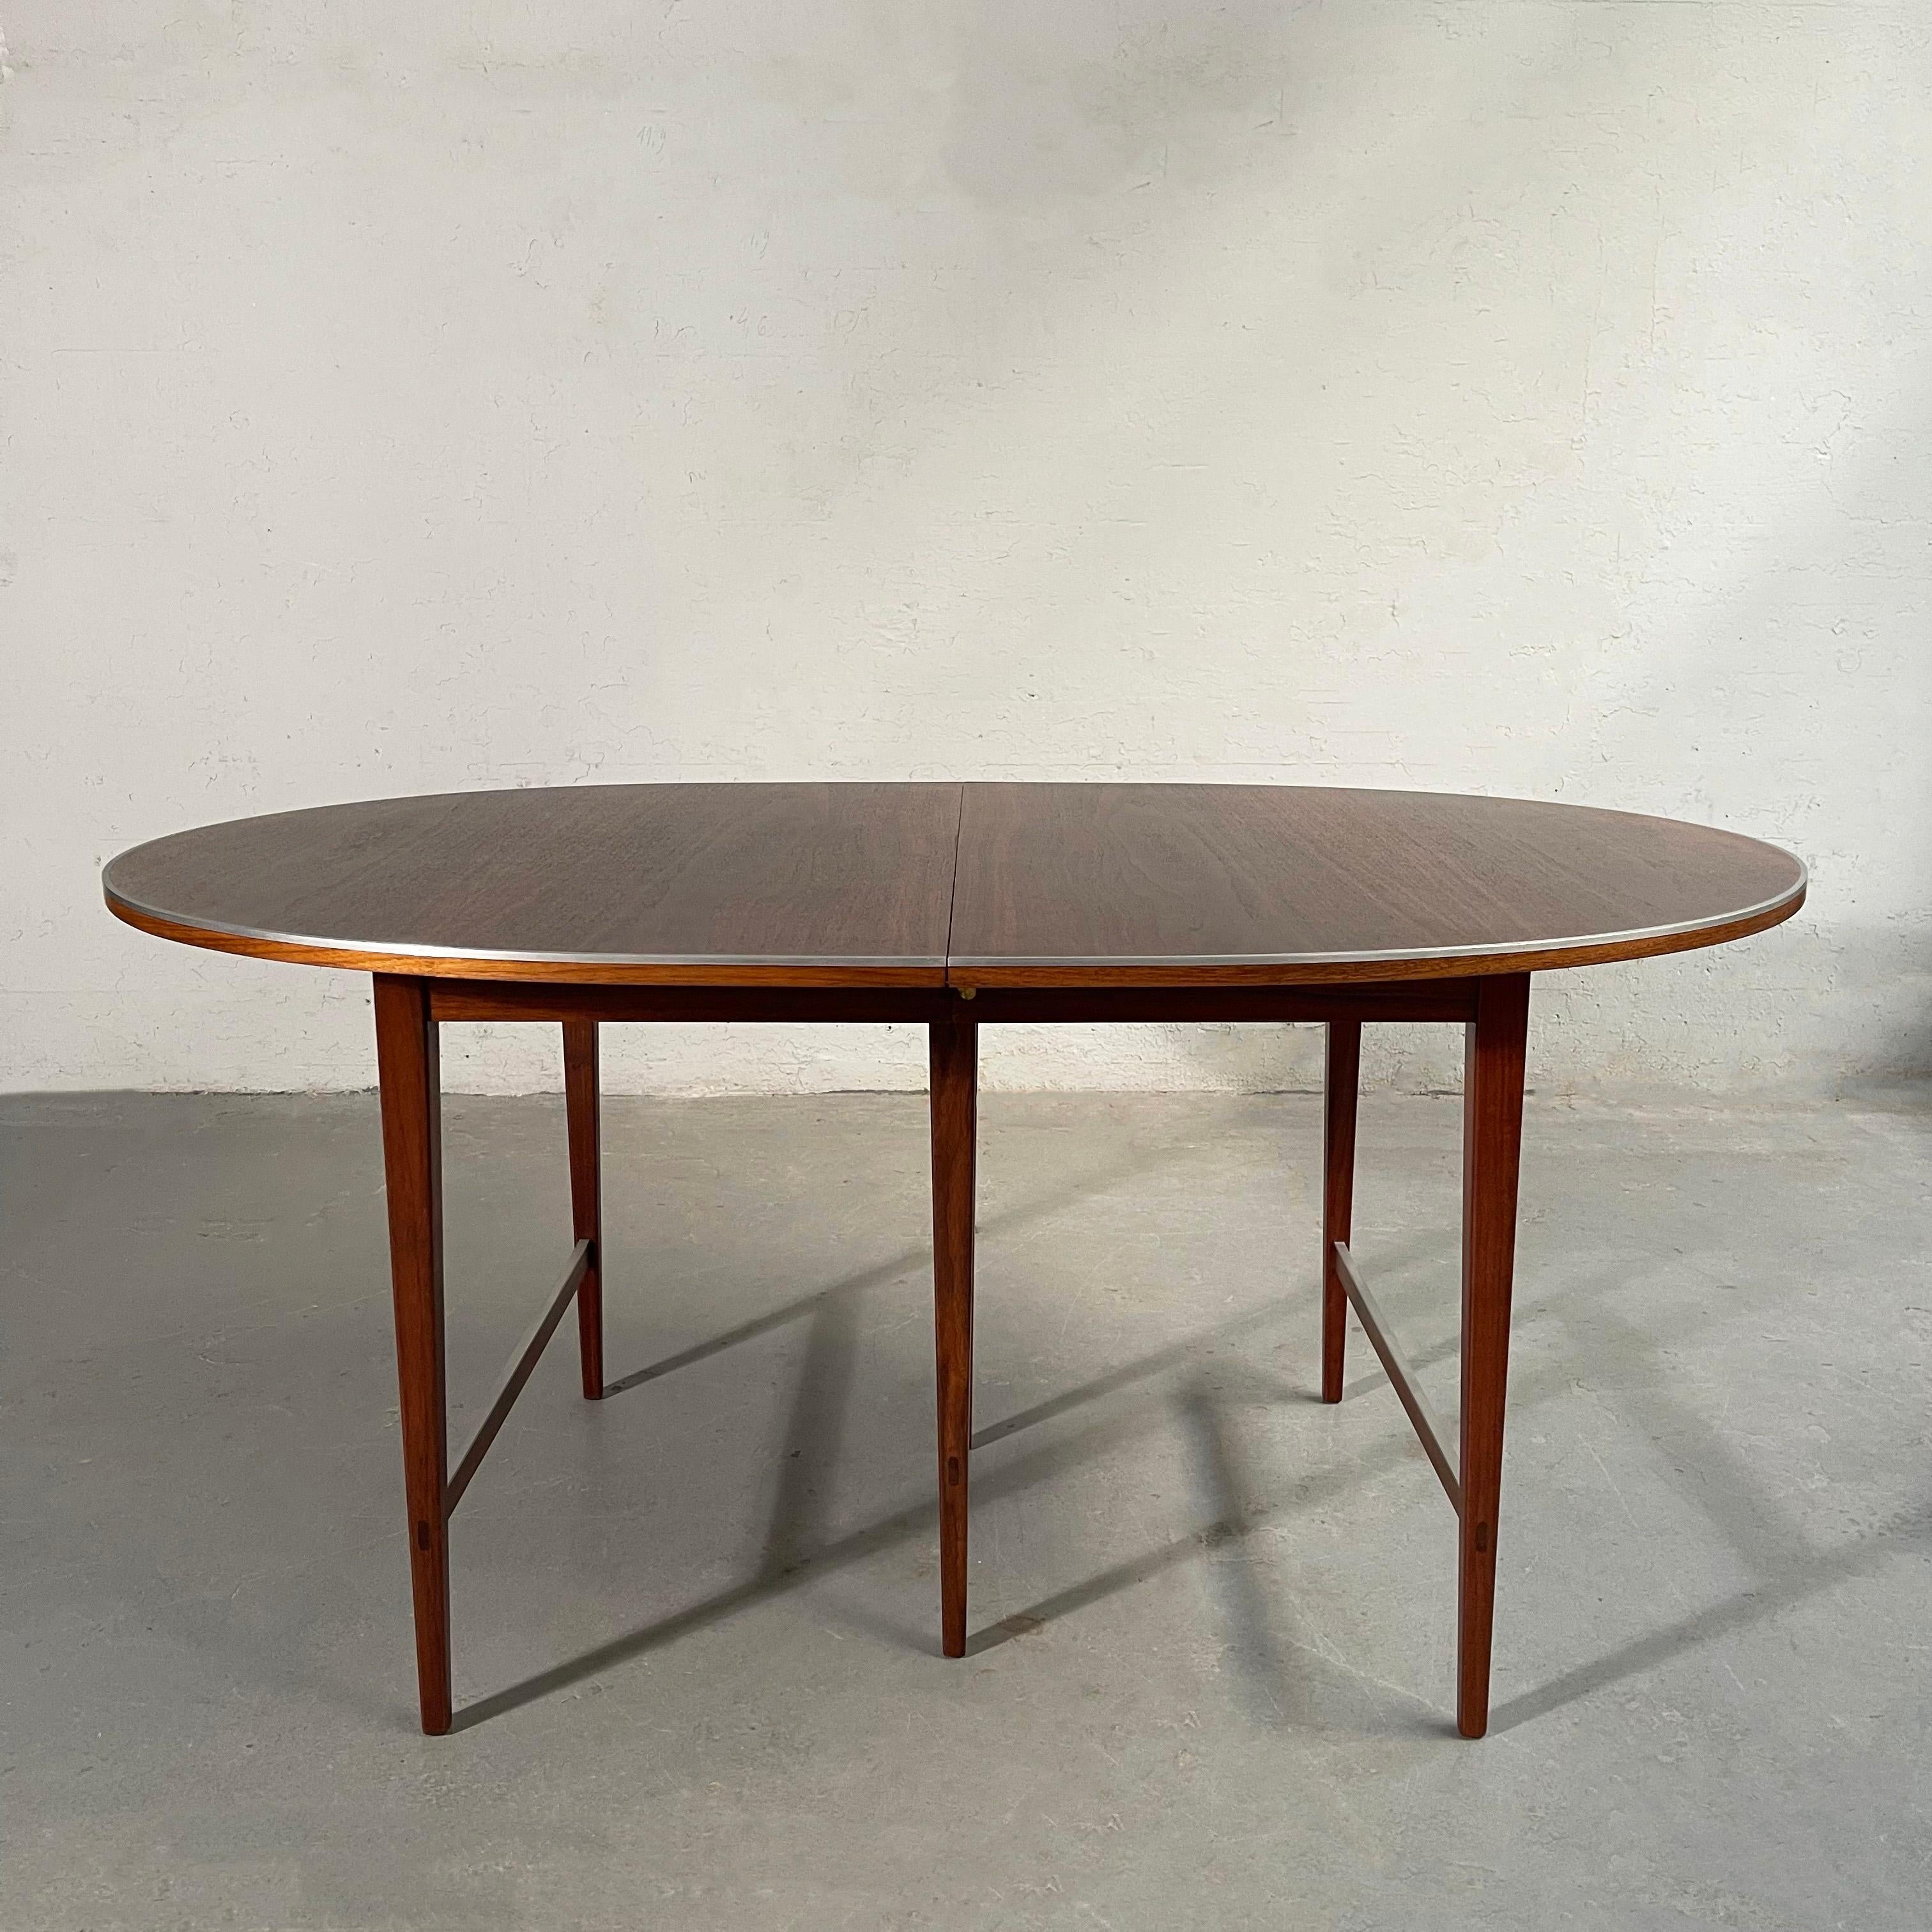 Elegant, Mid-Century Modern, oval, mahogany, extension dining table by Paul McCobb for H. Sacks & Sons, Connoisseur Collection features a subtle chrome trim on it's top and leg brackets. The table has four 16 inch leaves that extend the table from